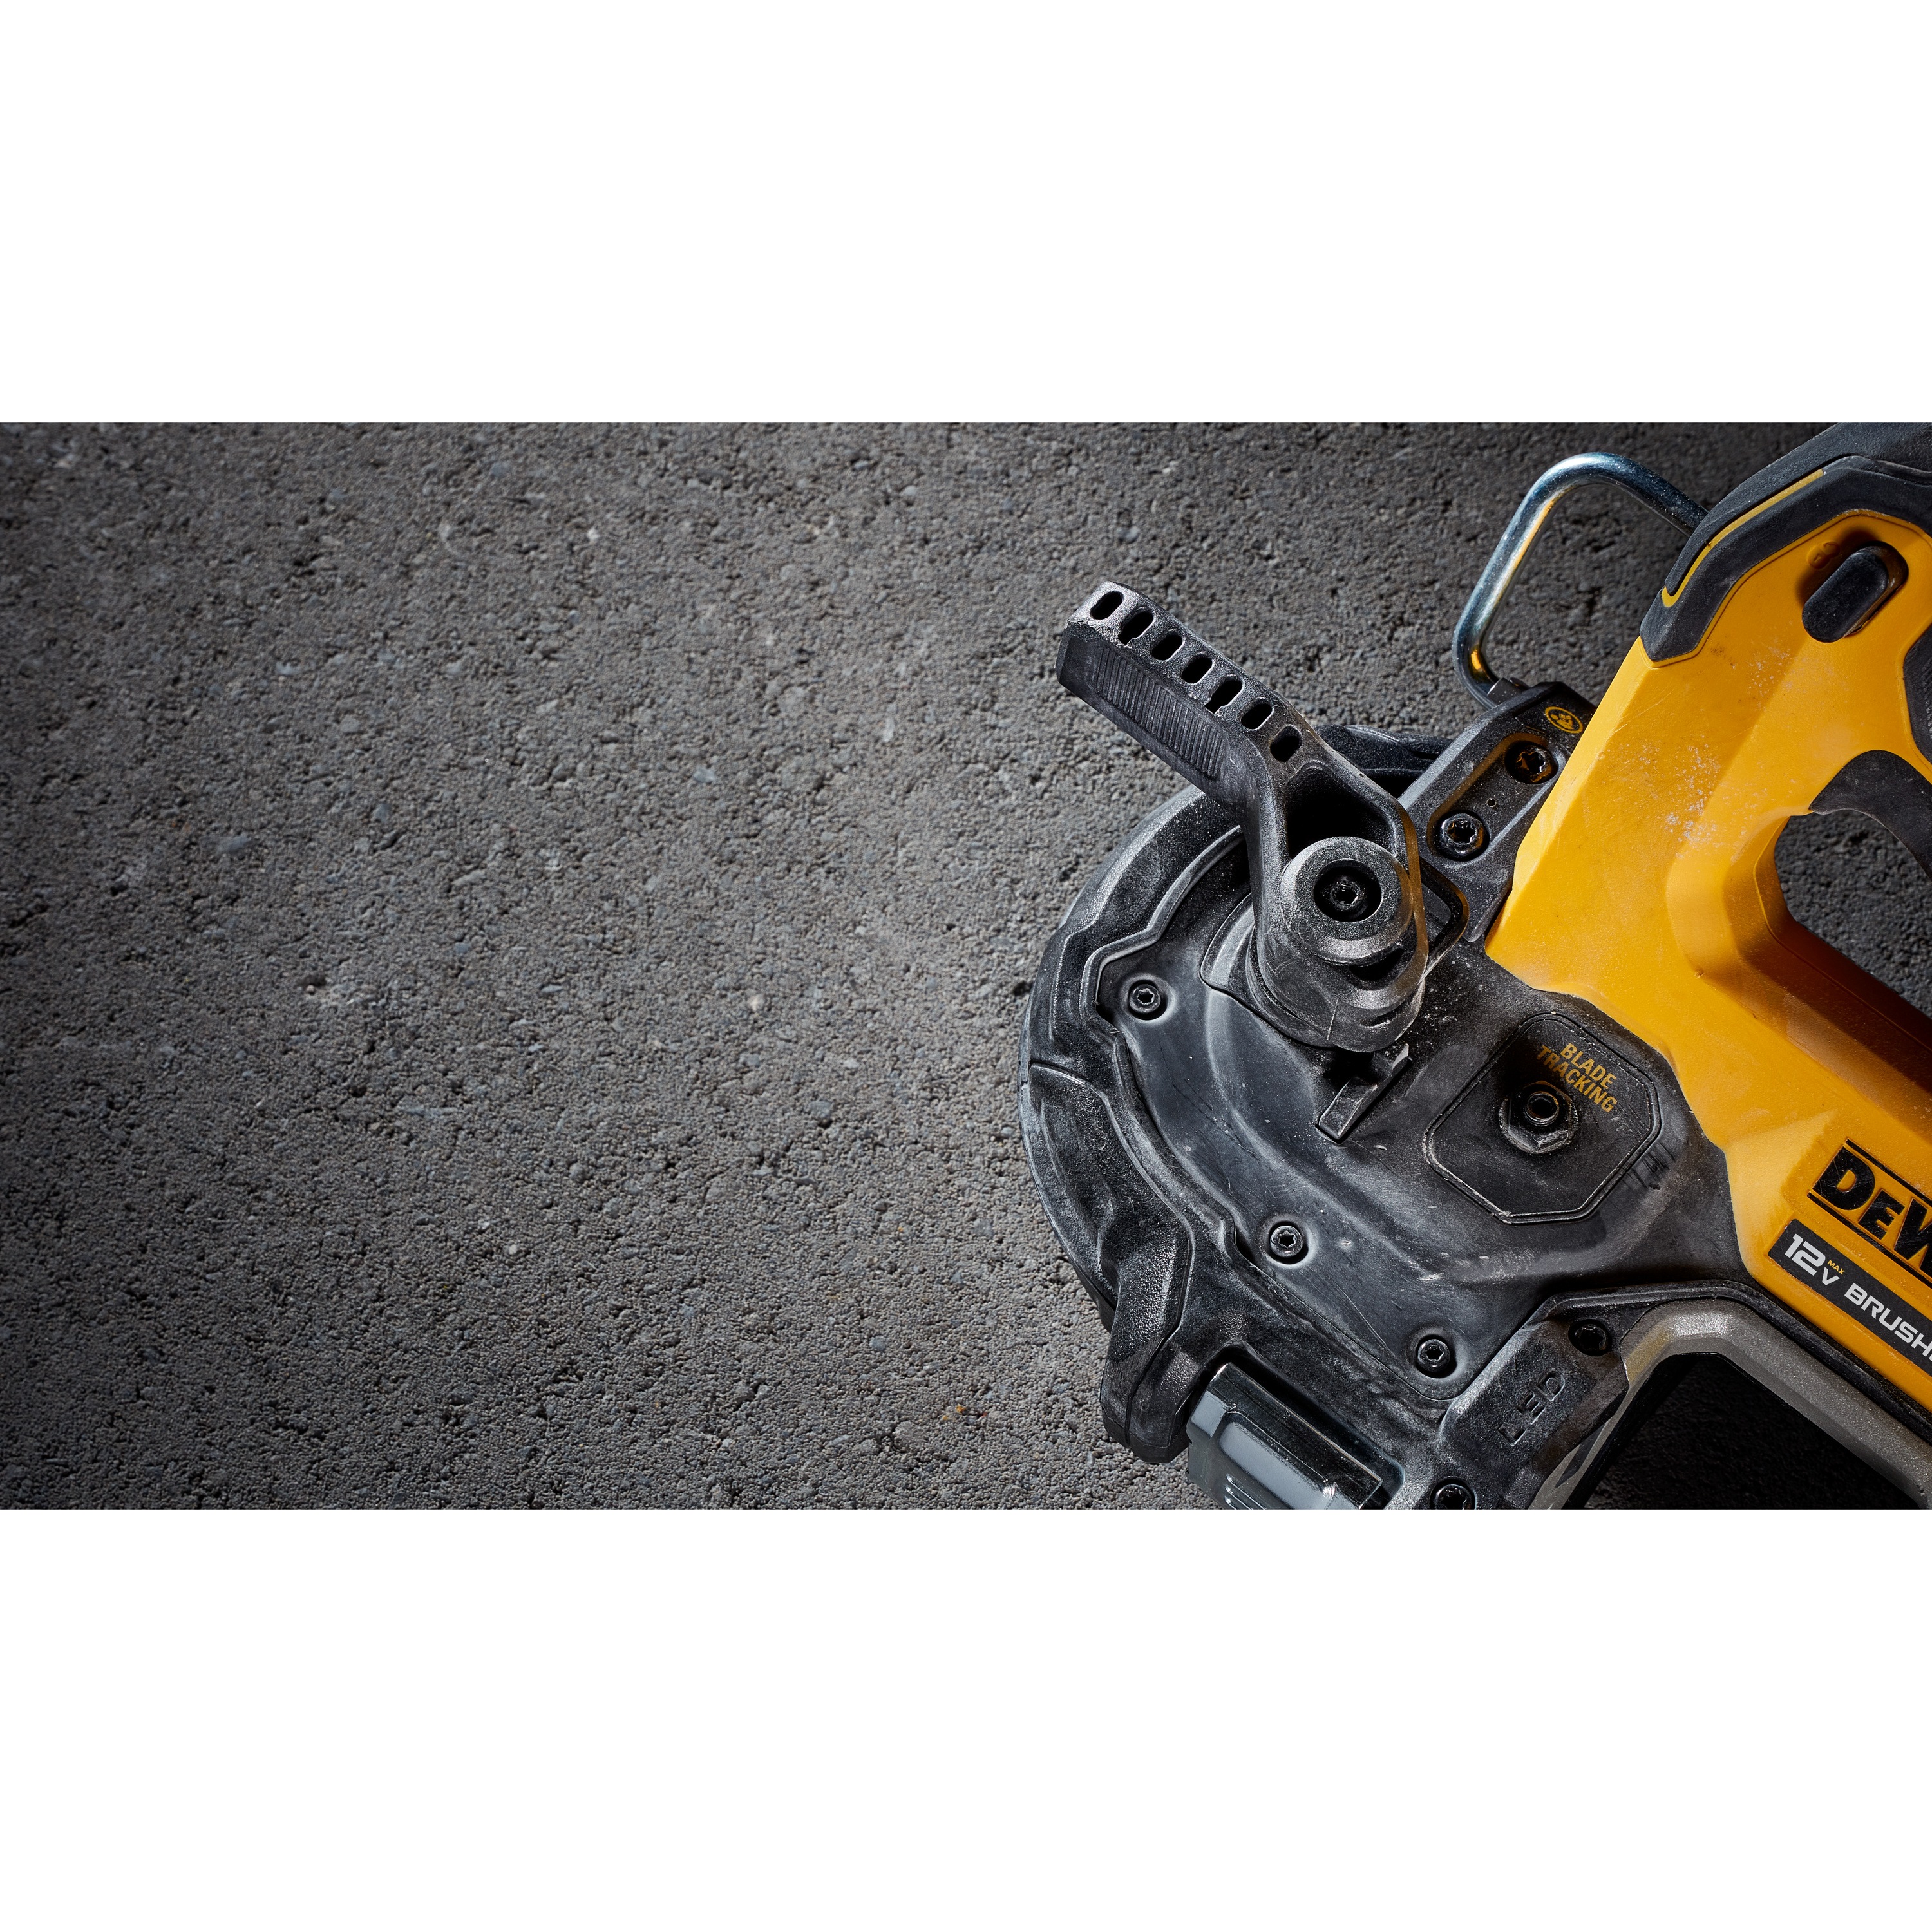 Blade tracking feature Xtreme 12 volt 1 and three quarter inch brushless cordless band saw tool.